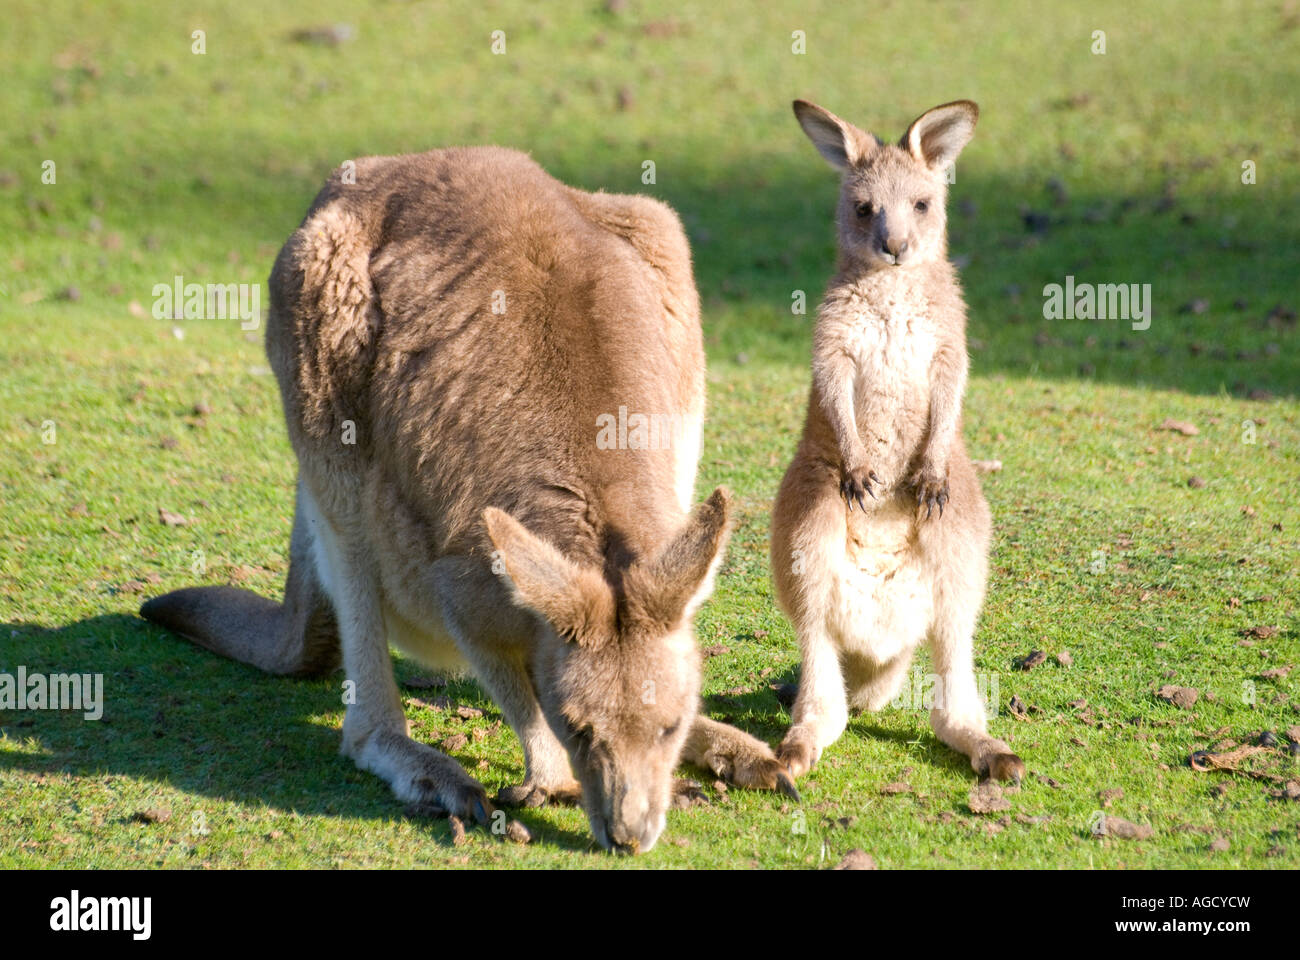 A Rufous Wallaby with a young joey grooming Stock Photo